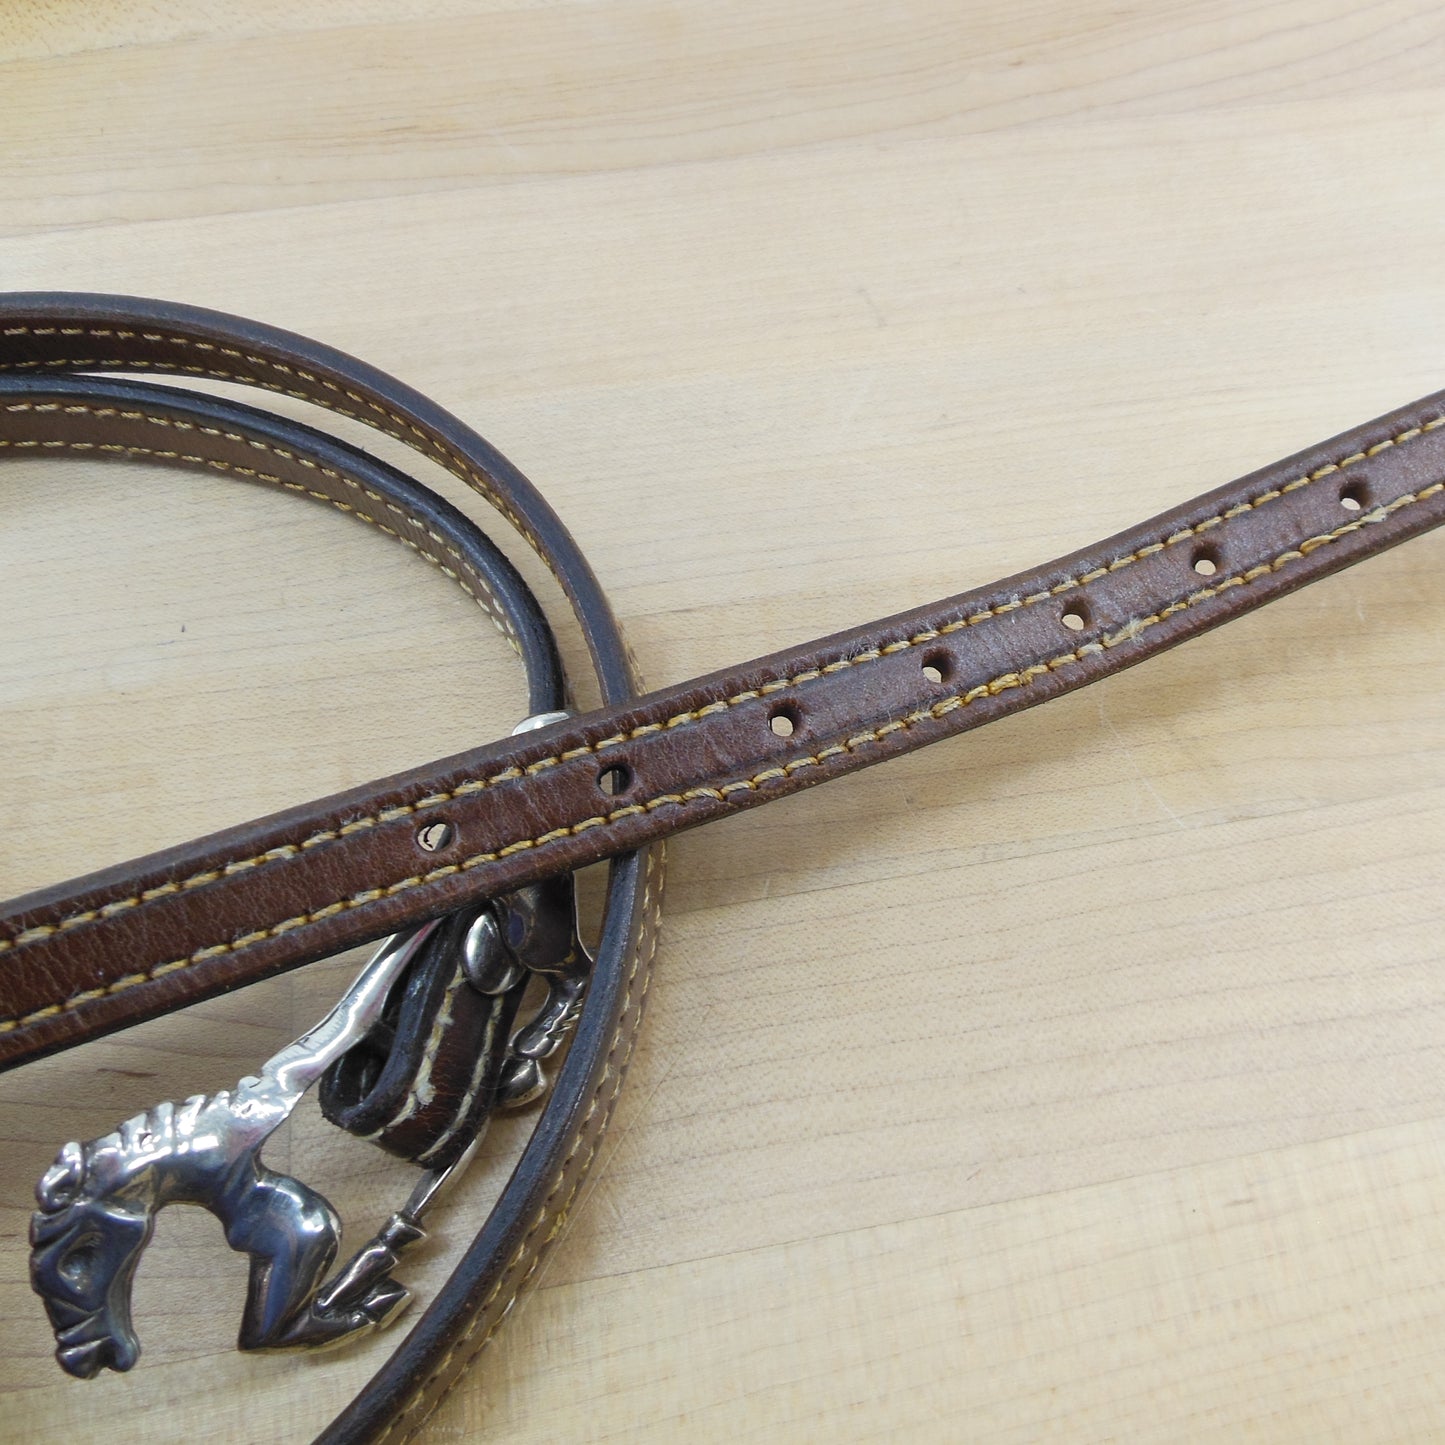 Galloping Horse Silver Buckle Double Stitched Leather Rein Belt Cowgirl Large Women's